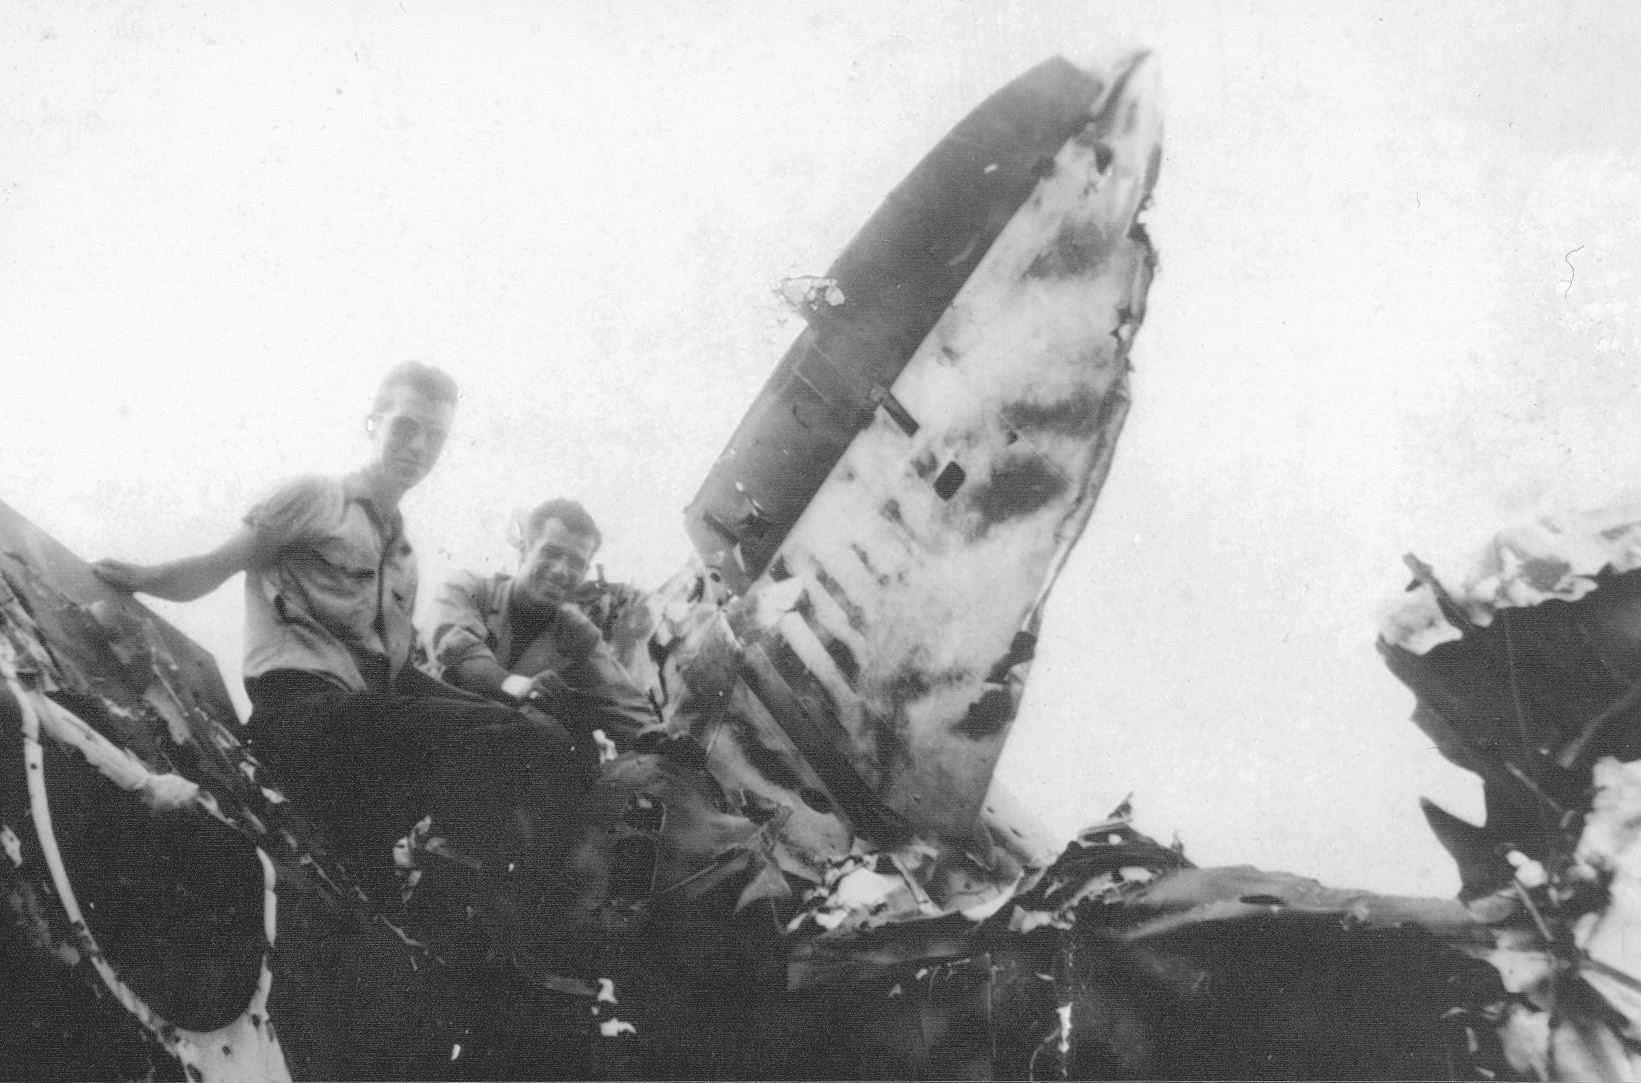 Red Mantini (right) and a comrade pose atop a wrecked Japanese aircraft in their search for souvenirs.